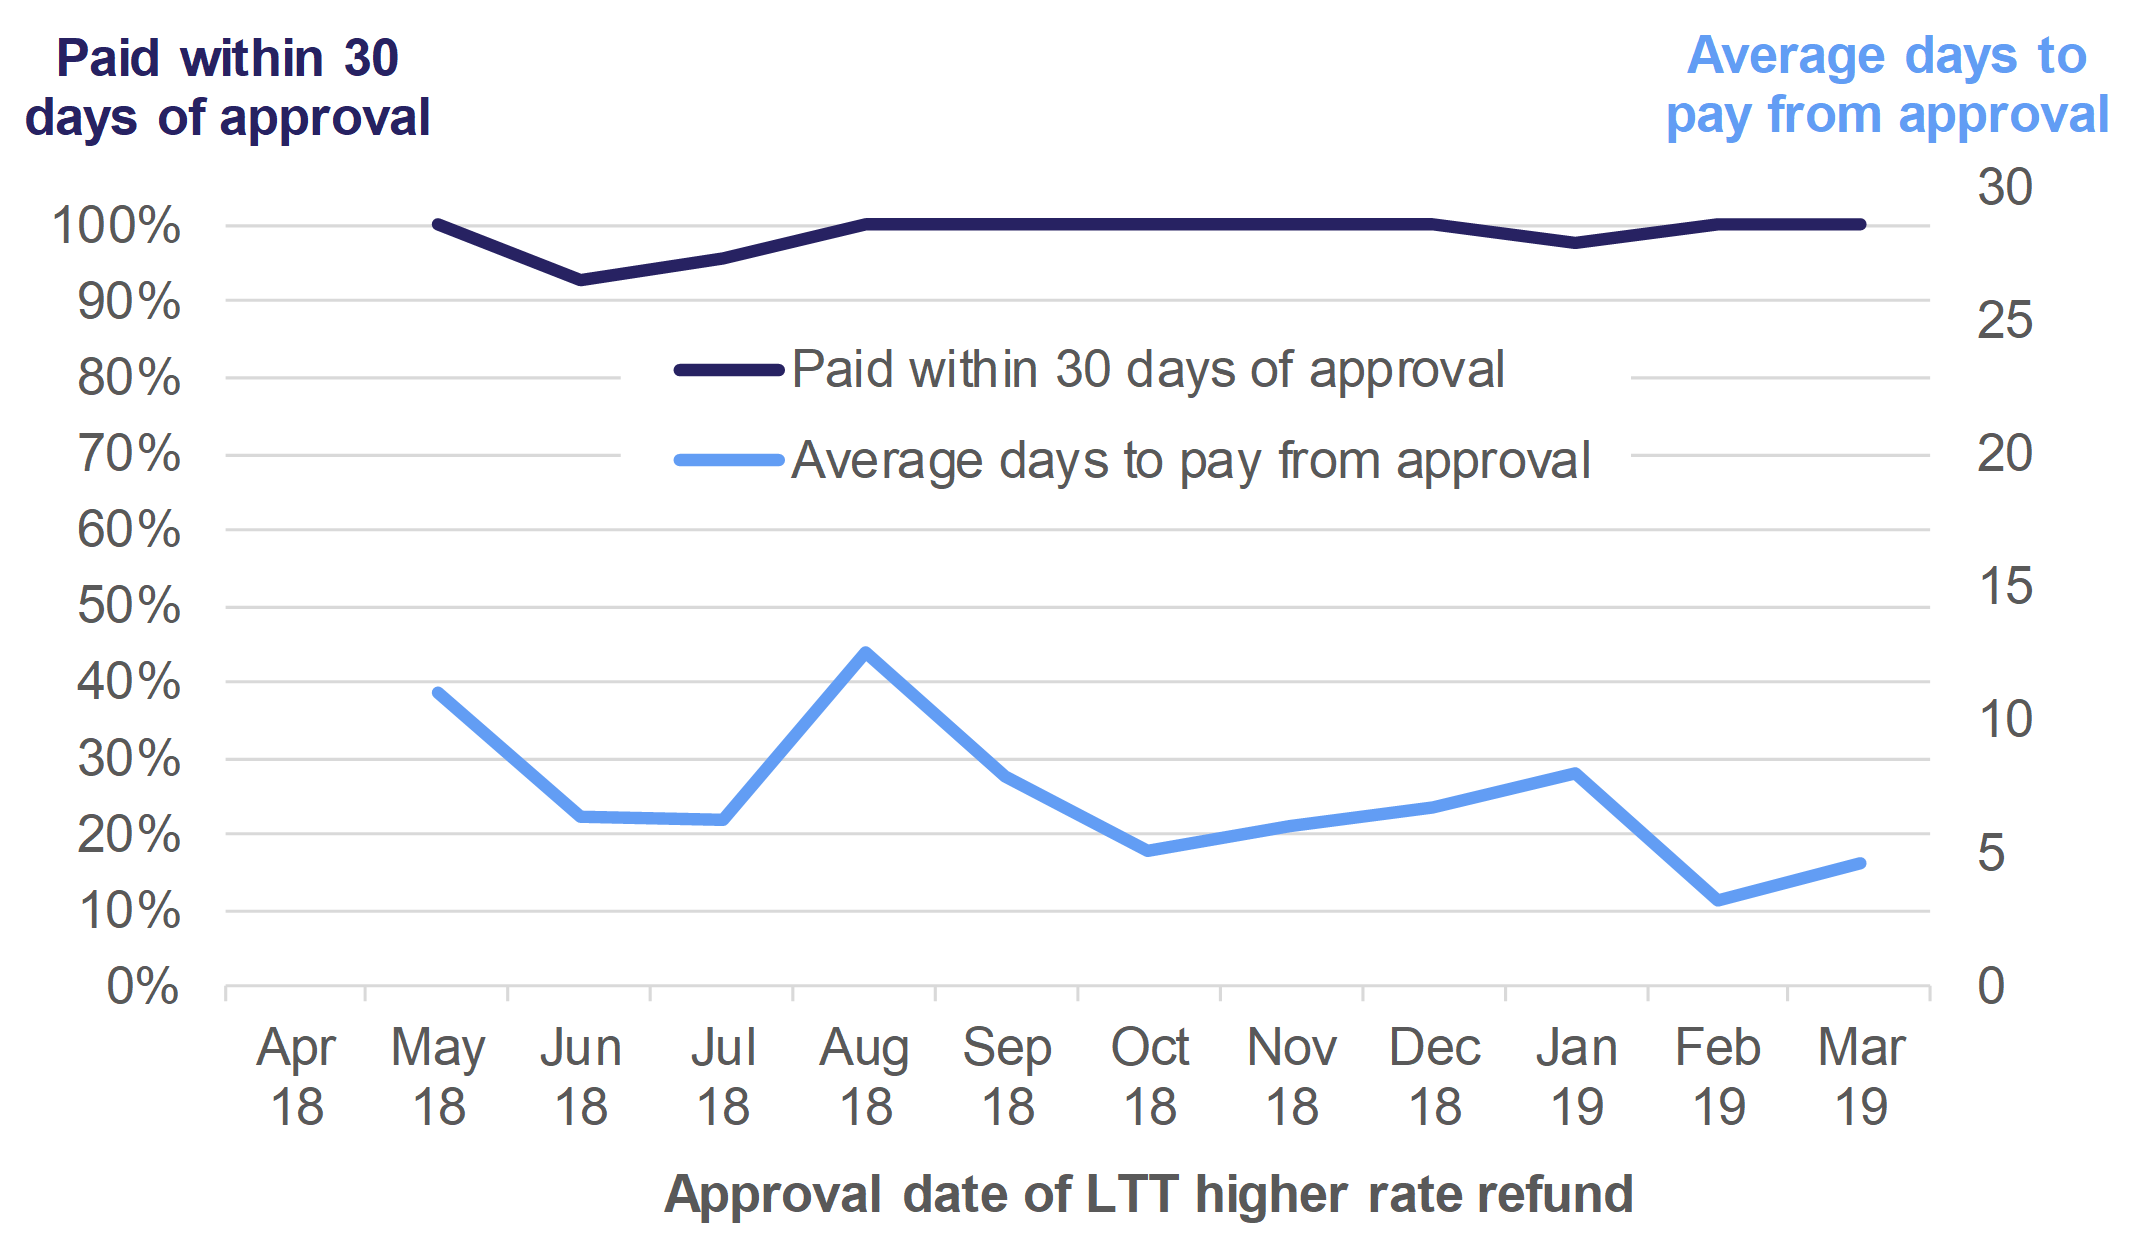 Figure 10.6 shows the percentage of LTT higher rate refunds paid within 30 days of approval, and the average days to pay from approval. Data is shown by the month when the LTT higher rate refund was approved, for April 2018 to March 2019.